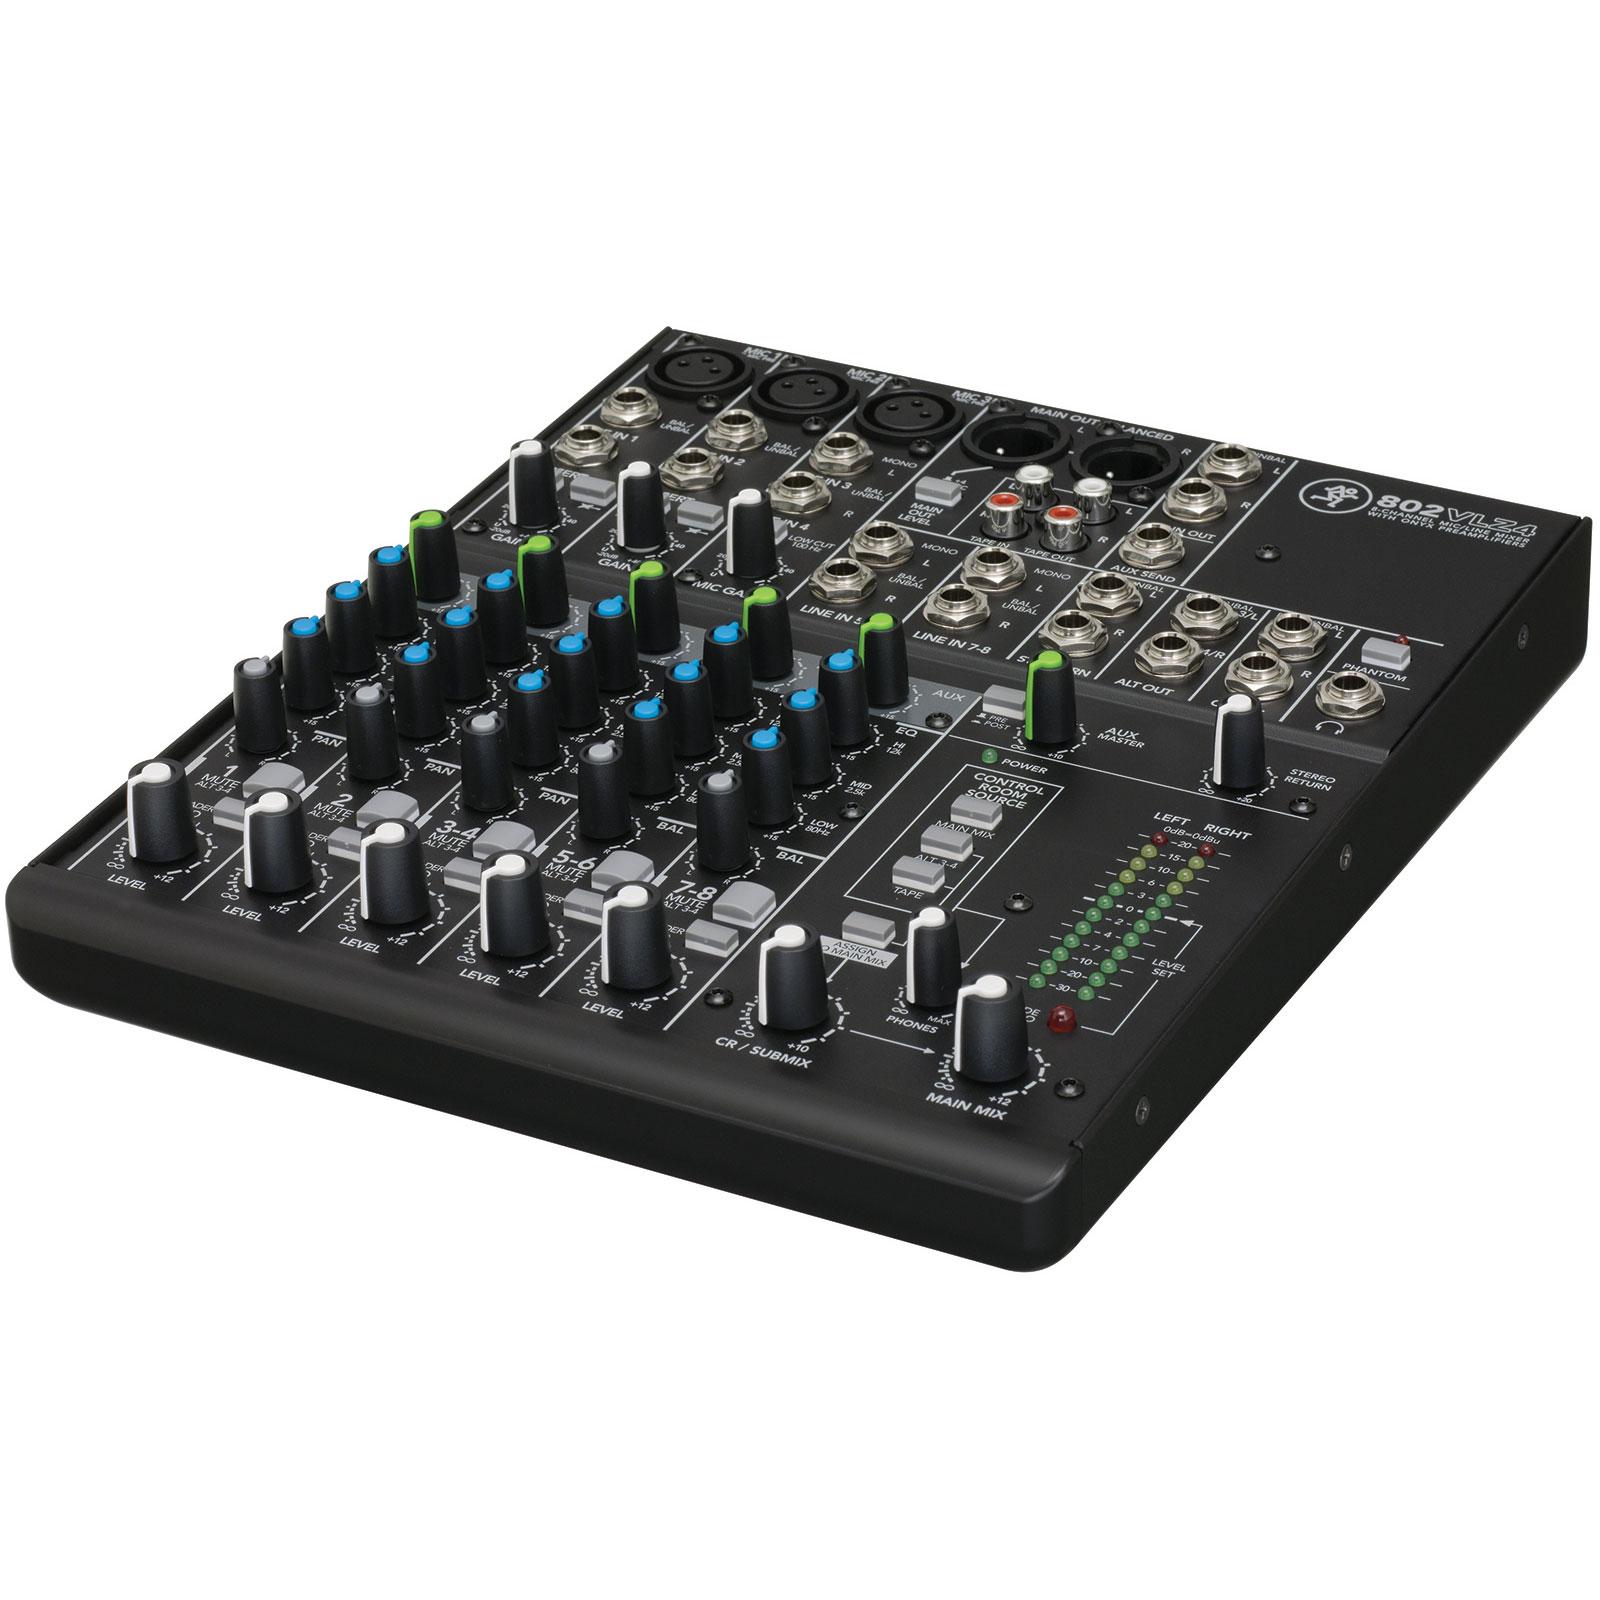 Photos - Mixing Desk Mackie 802VLZ4 8-Channel Ultra Compact Mixer 